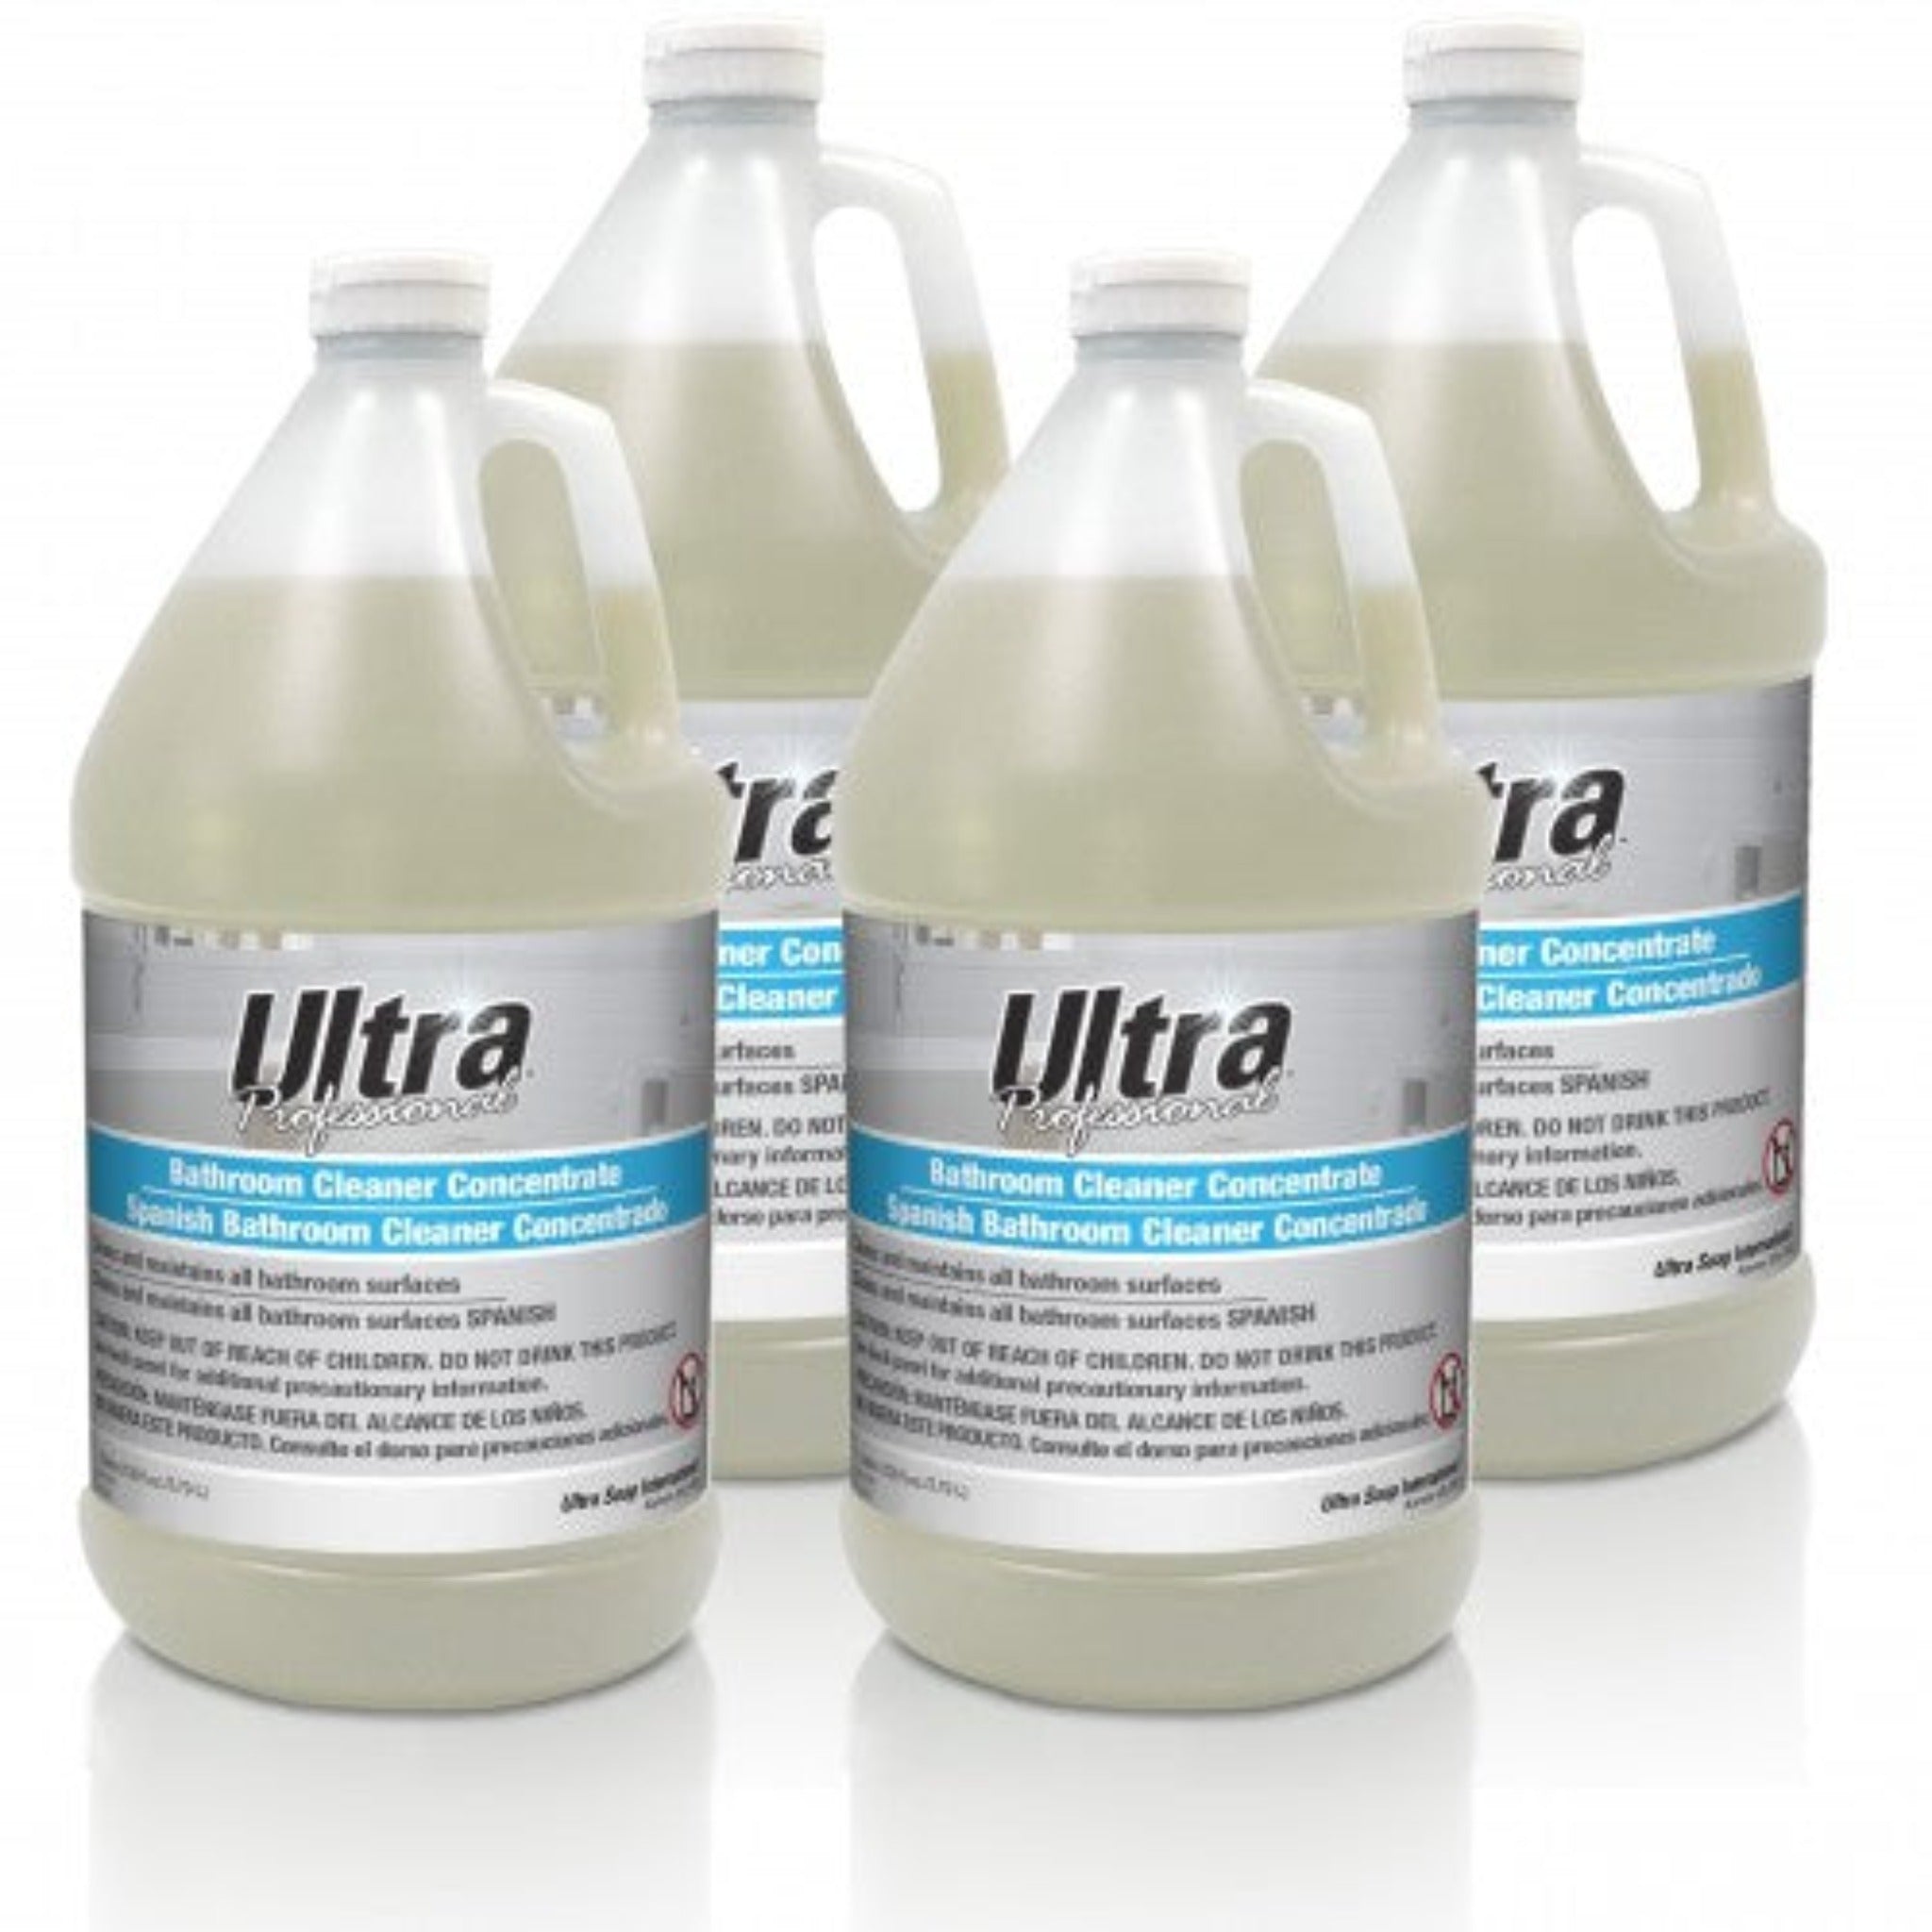 Ultra Professional Bathroom Cleaner Concentrate - 4x1 Gallon